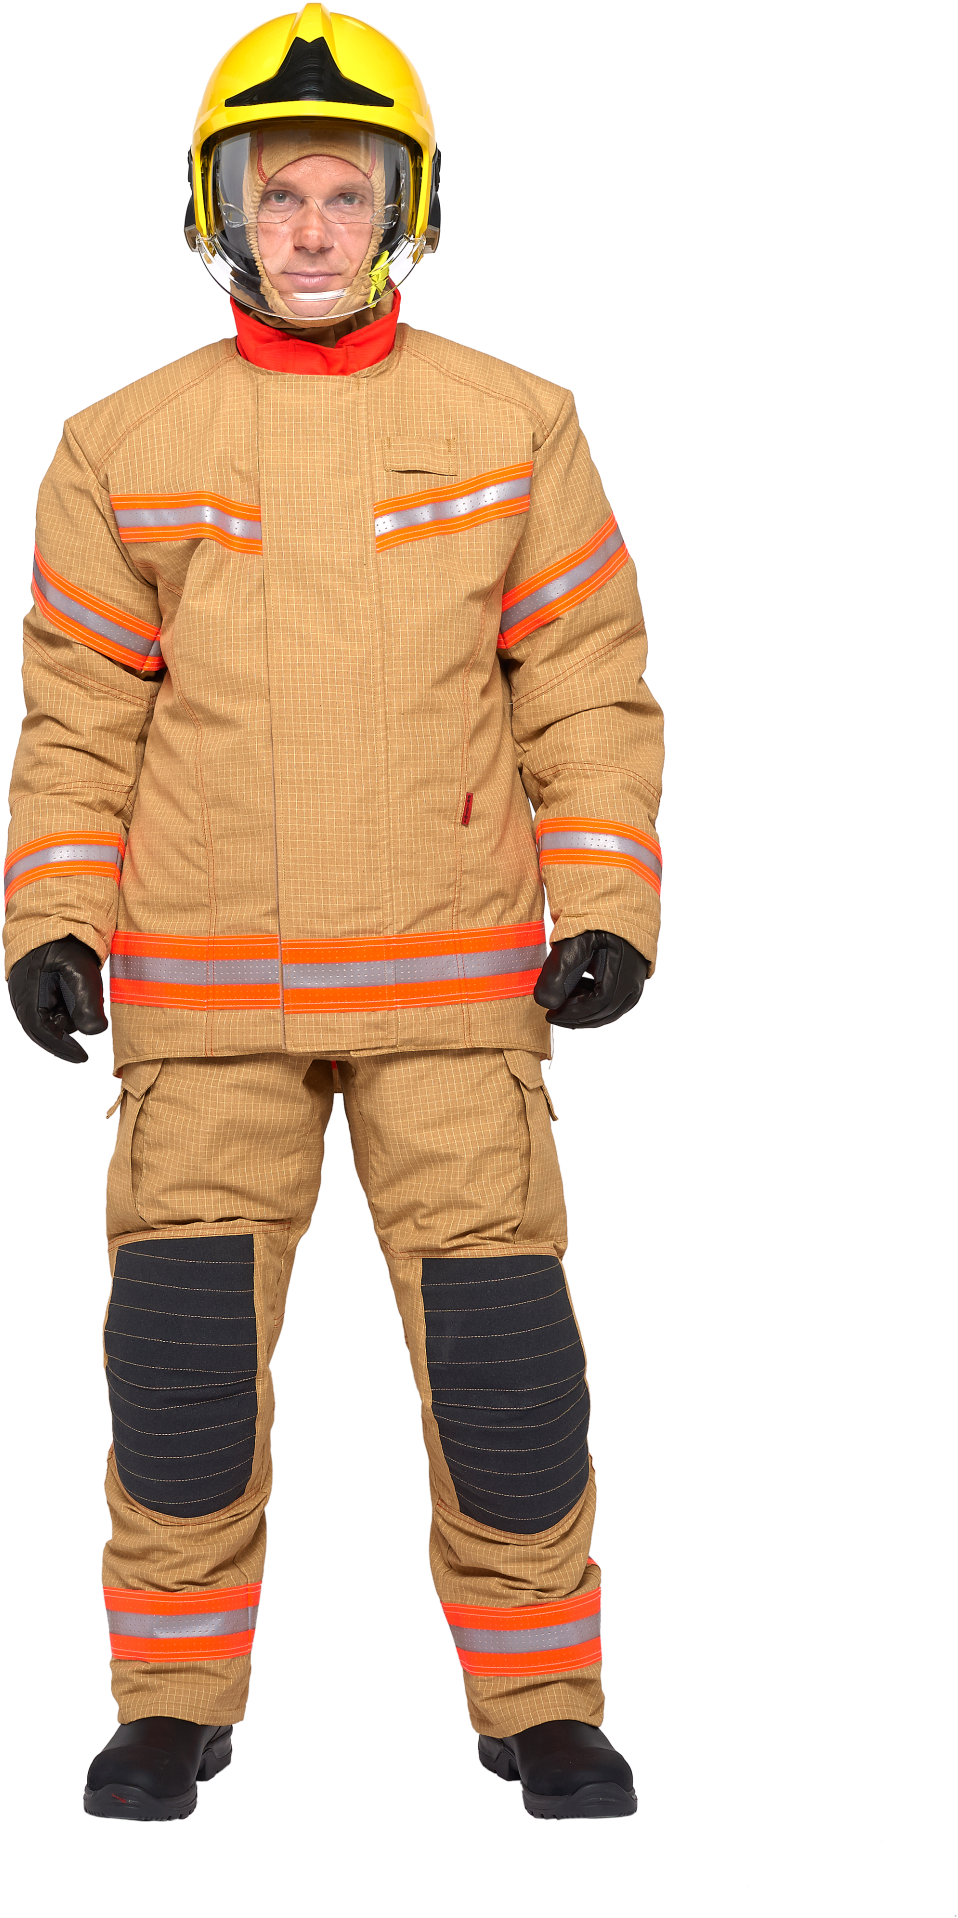 Bristol Uniforms Launches New Range Of Structural Firefighting - Firefighter (1365x2048)